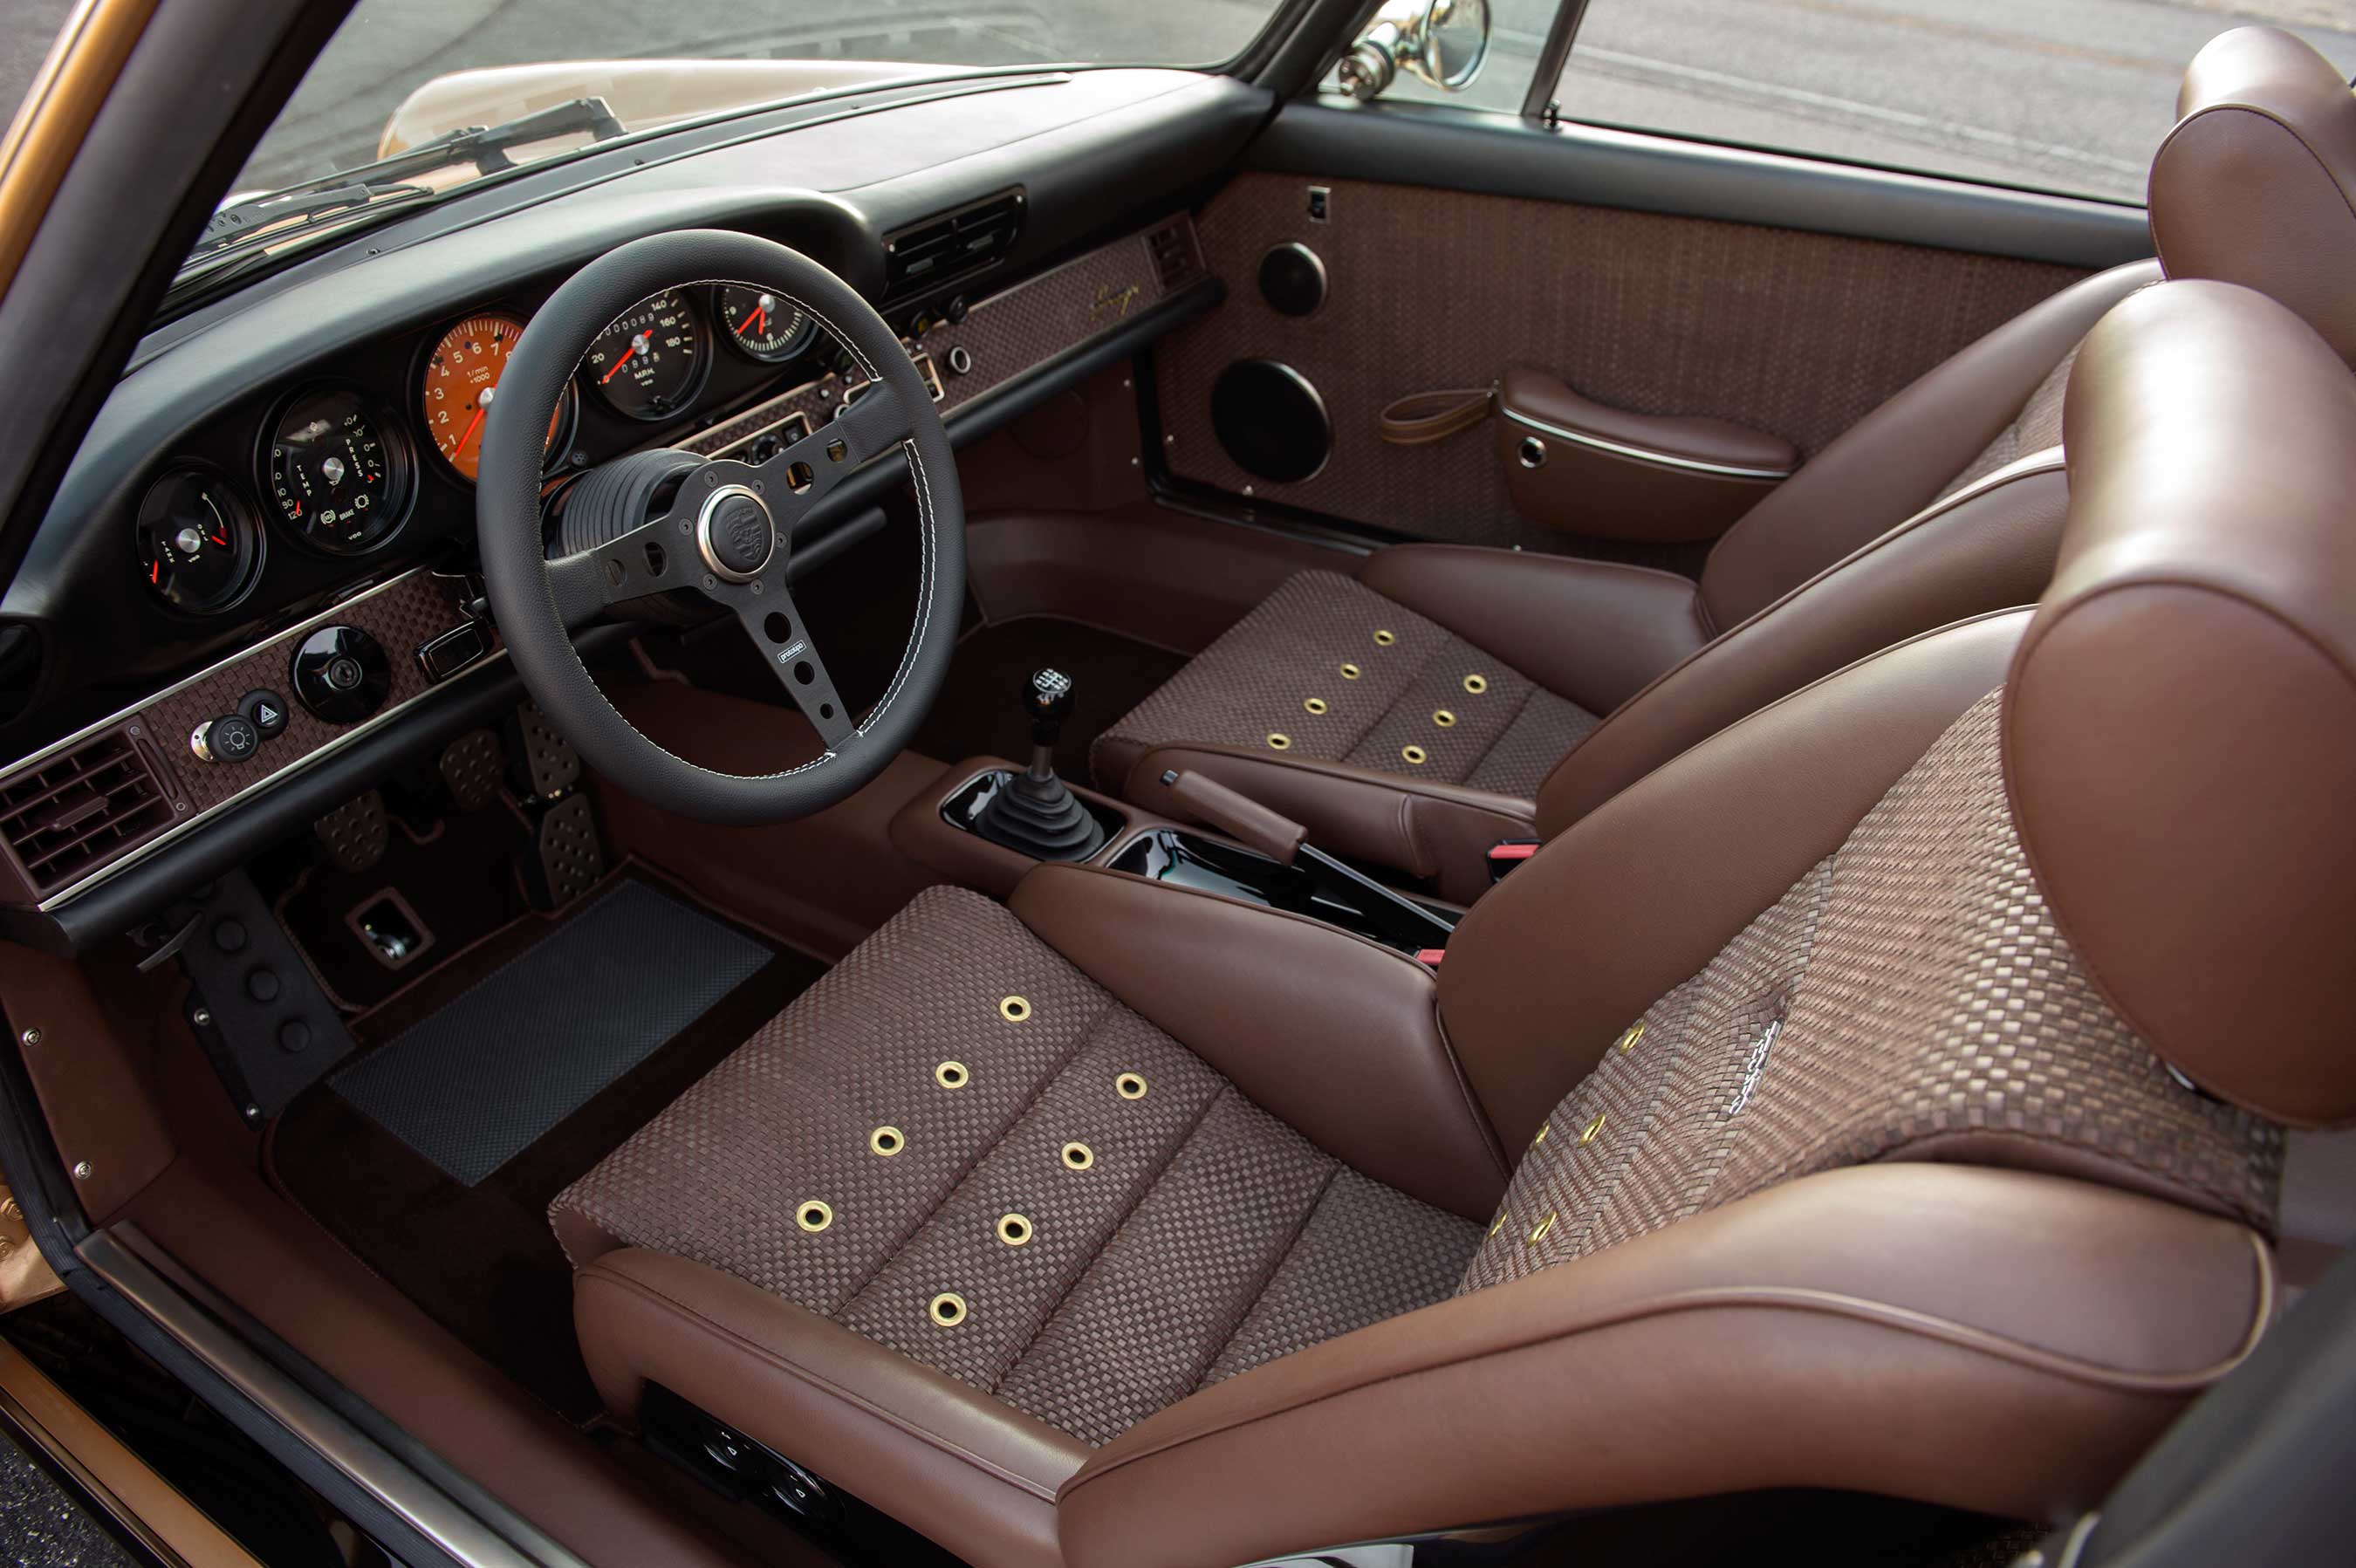 Interior modifications by Singer Vehicle Design for this customers’ Targa include ‘Tobacco Brown’ woven leather and suede weave with grommets on front sports seats and folding rear seats, suggesting a “touring” style.